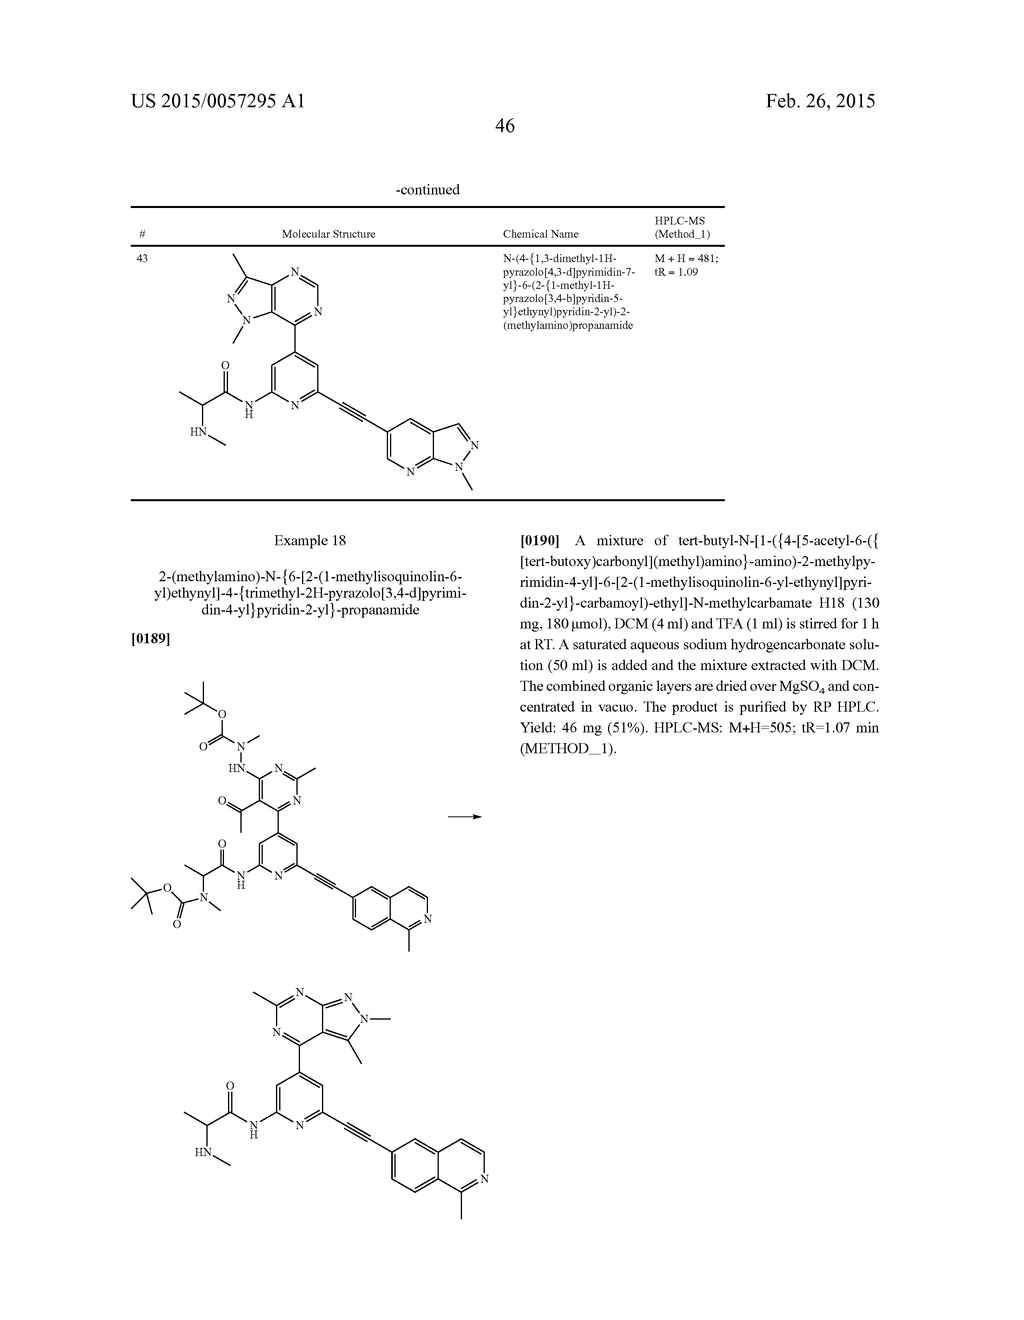 New 6-Alkynyl Pyridine - diagram, schematic, and image 47